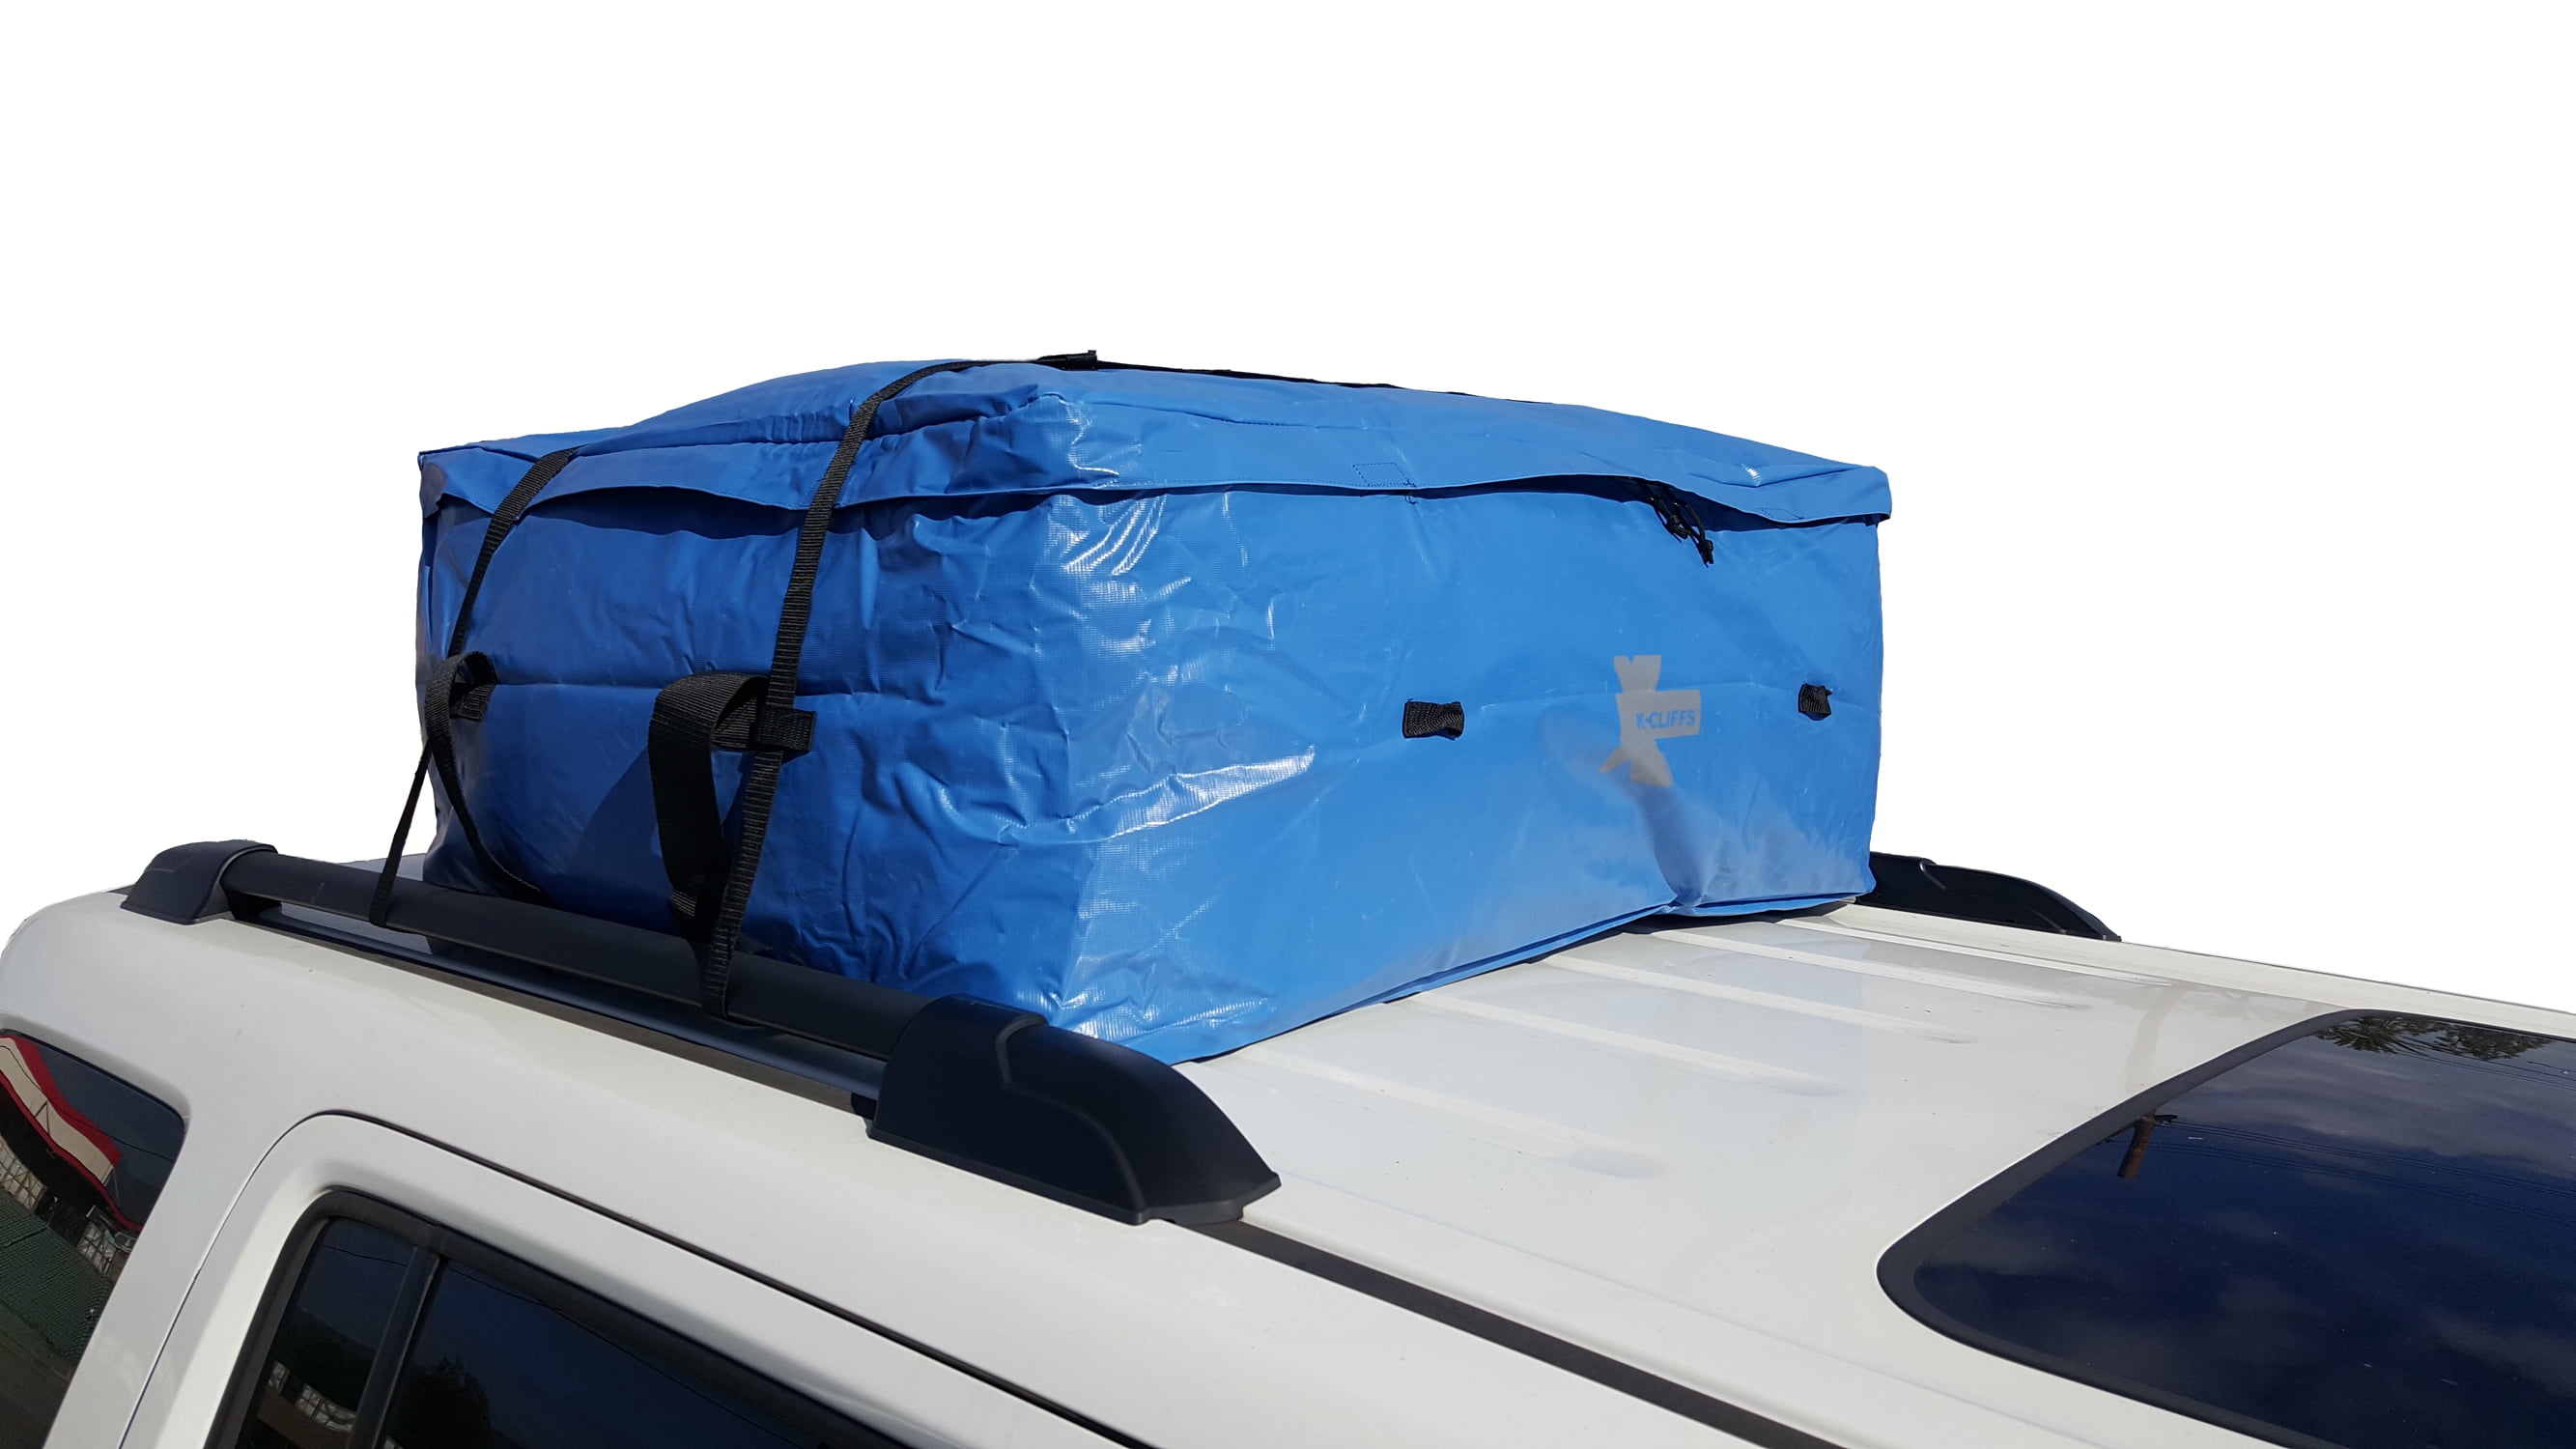 RoofBag Rooftop Cargo Carrier Bundle Fits All Cars with or Without Rack Storage Bag +Heavy Duty Straps| Made in USA Waterproof Includes Protective Mat 1 Year Warranty 